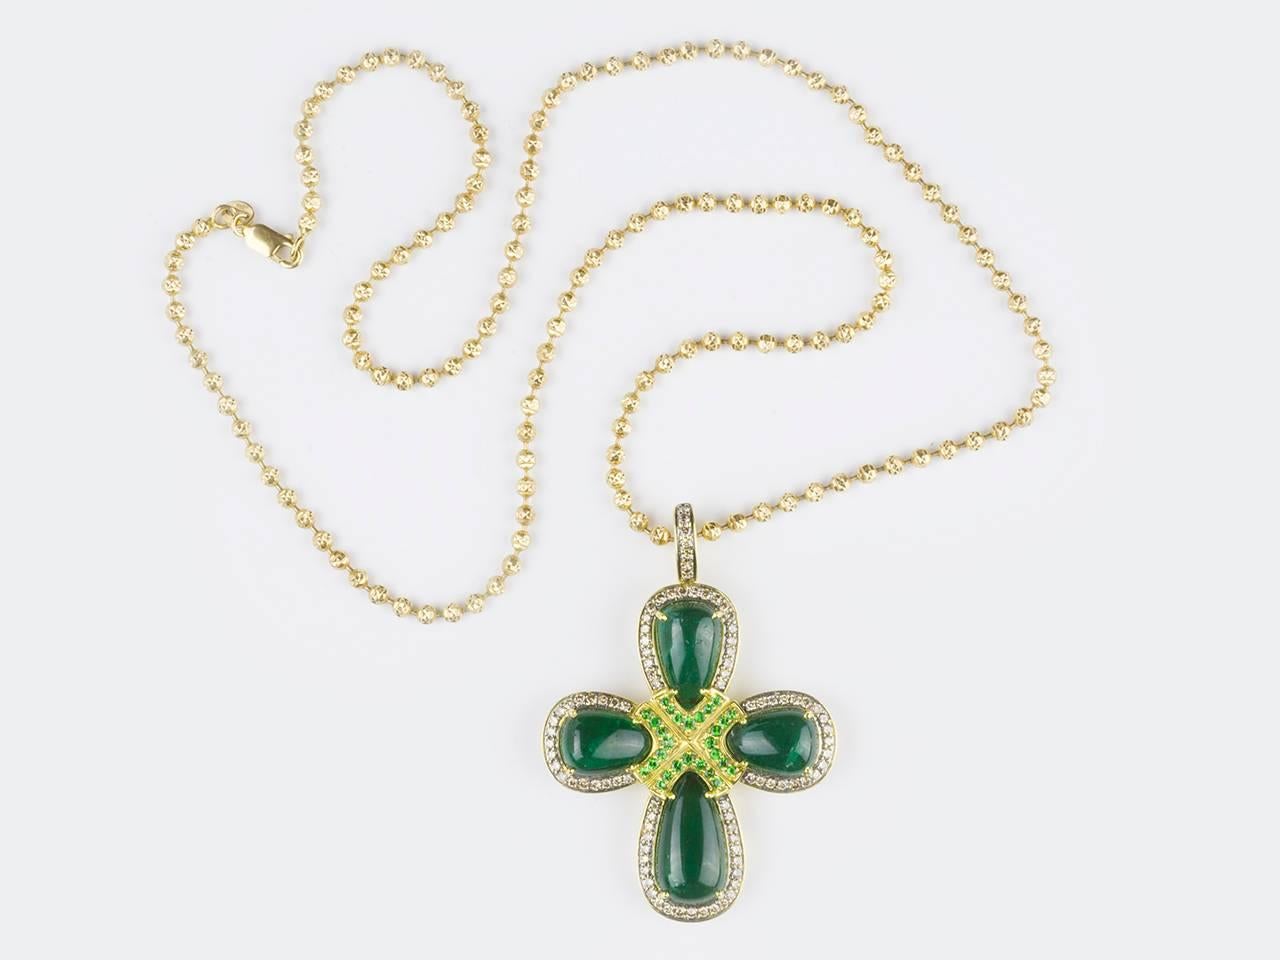 Pendant features 4 pear-shaped emerald cabochon emeralds in colored diamond-set frames and round garnets with blackened gold accents. Signed WINC. (Robert Wander). Cross is suspended from gold ball-link chain.